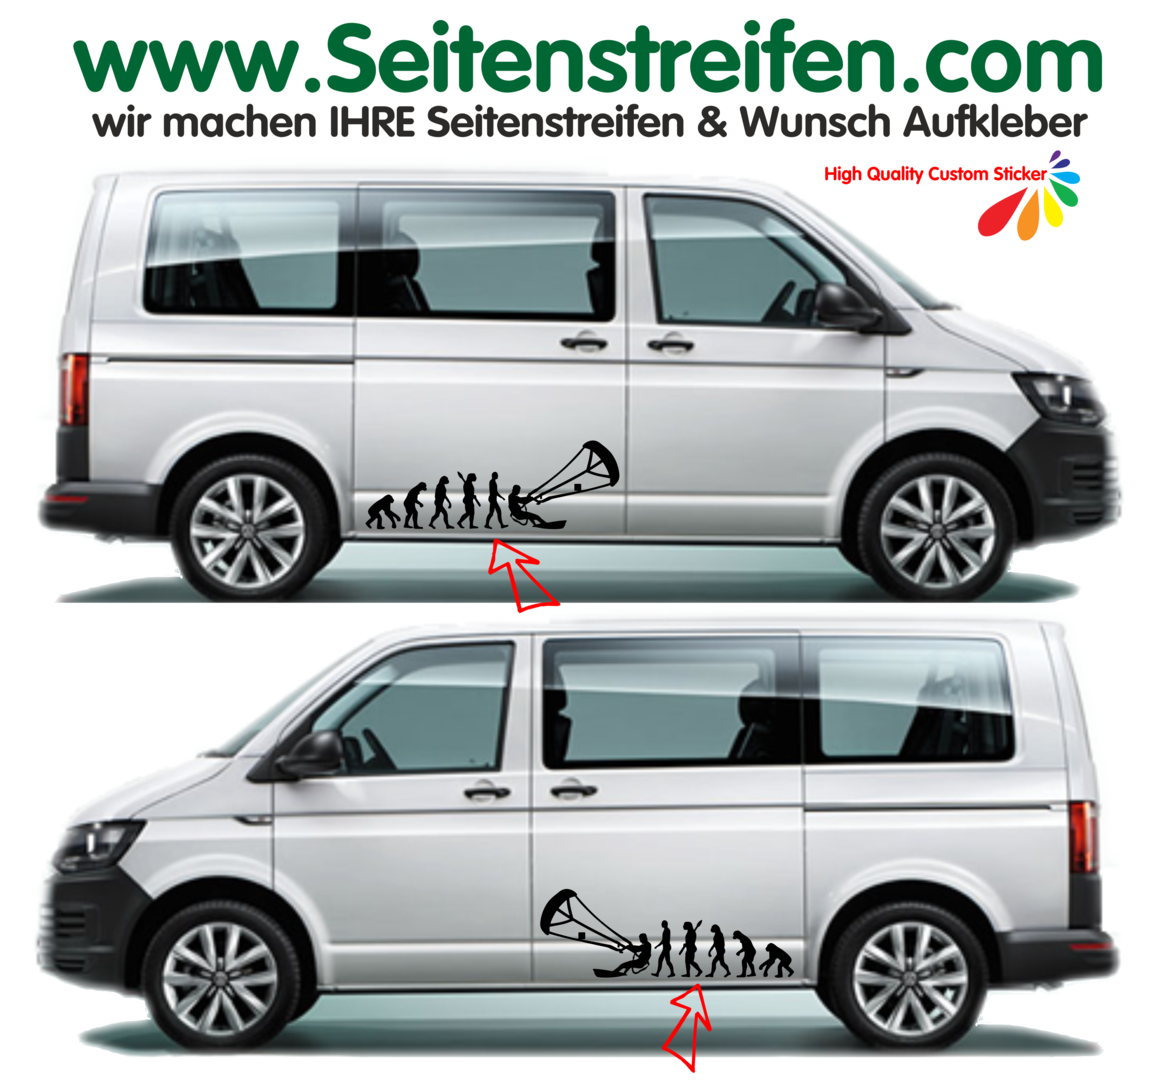 Volkswagen Transporter VW T5 T4 Camper Scull logo Large 17" Decal Stickers X 2